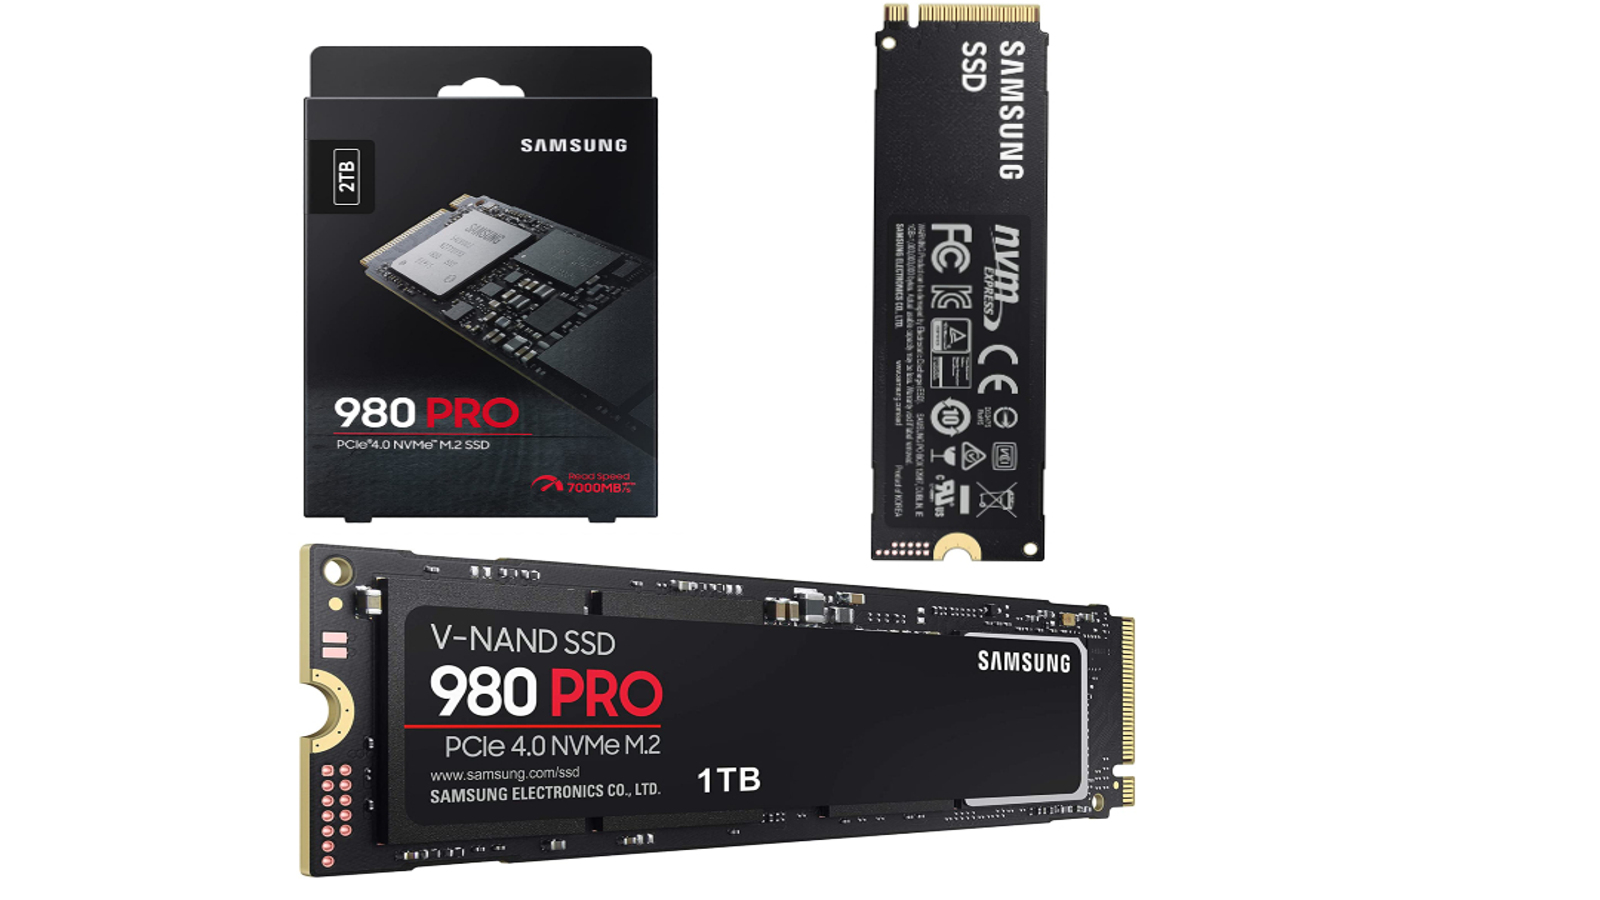 Samsung SSD 980 PRO PCle 4.0 NVMe M.2 on motherboard background